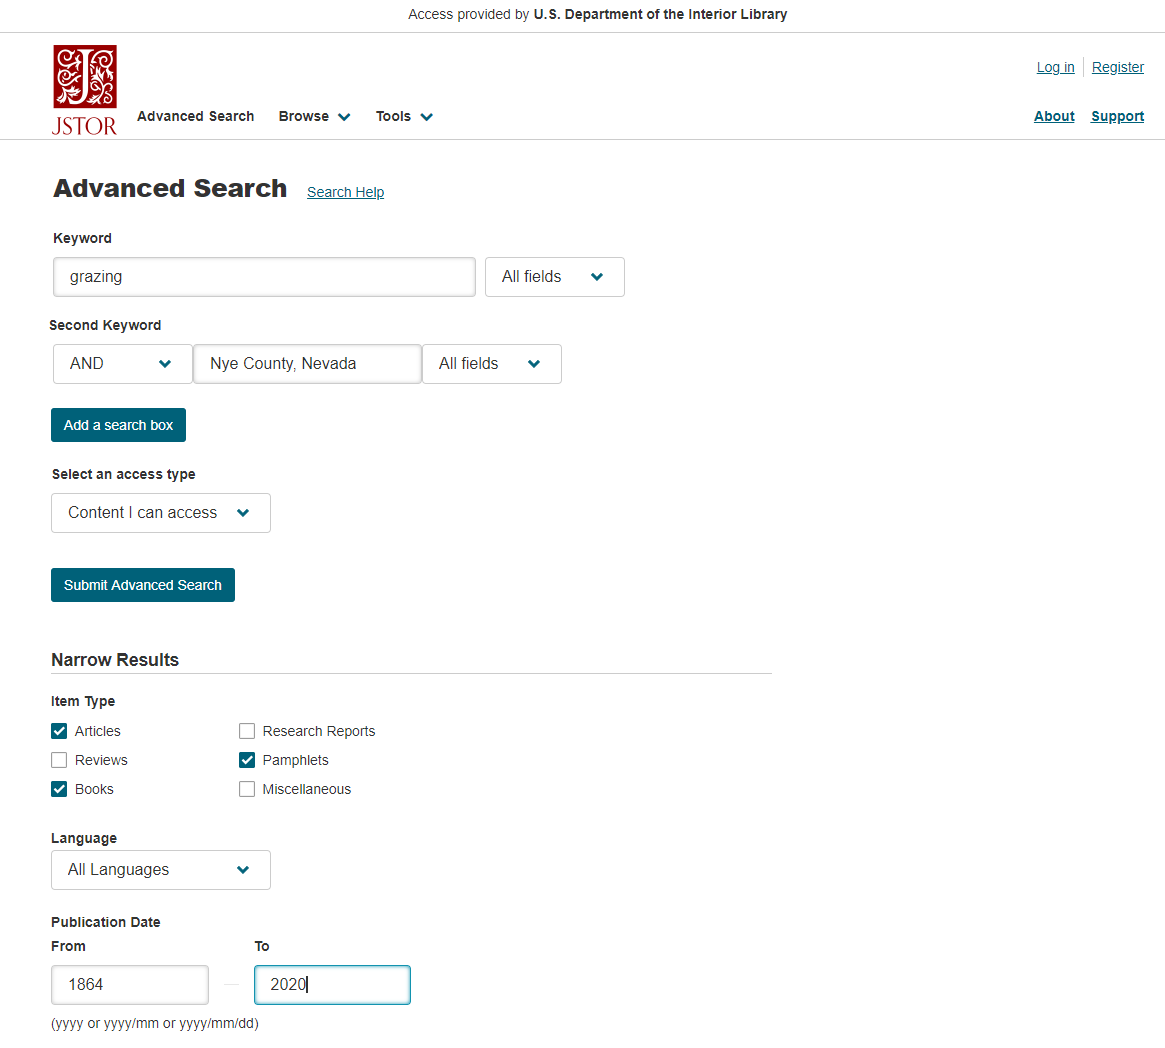 A screenshot of the "Narrow Results" section of the JSTOR search tool 